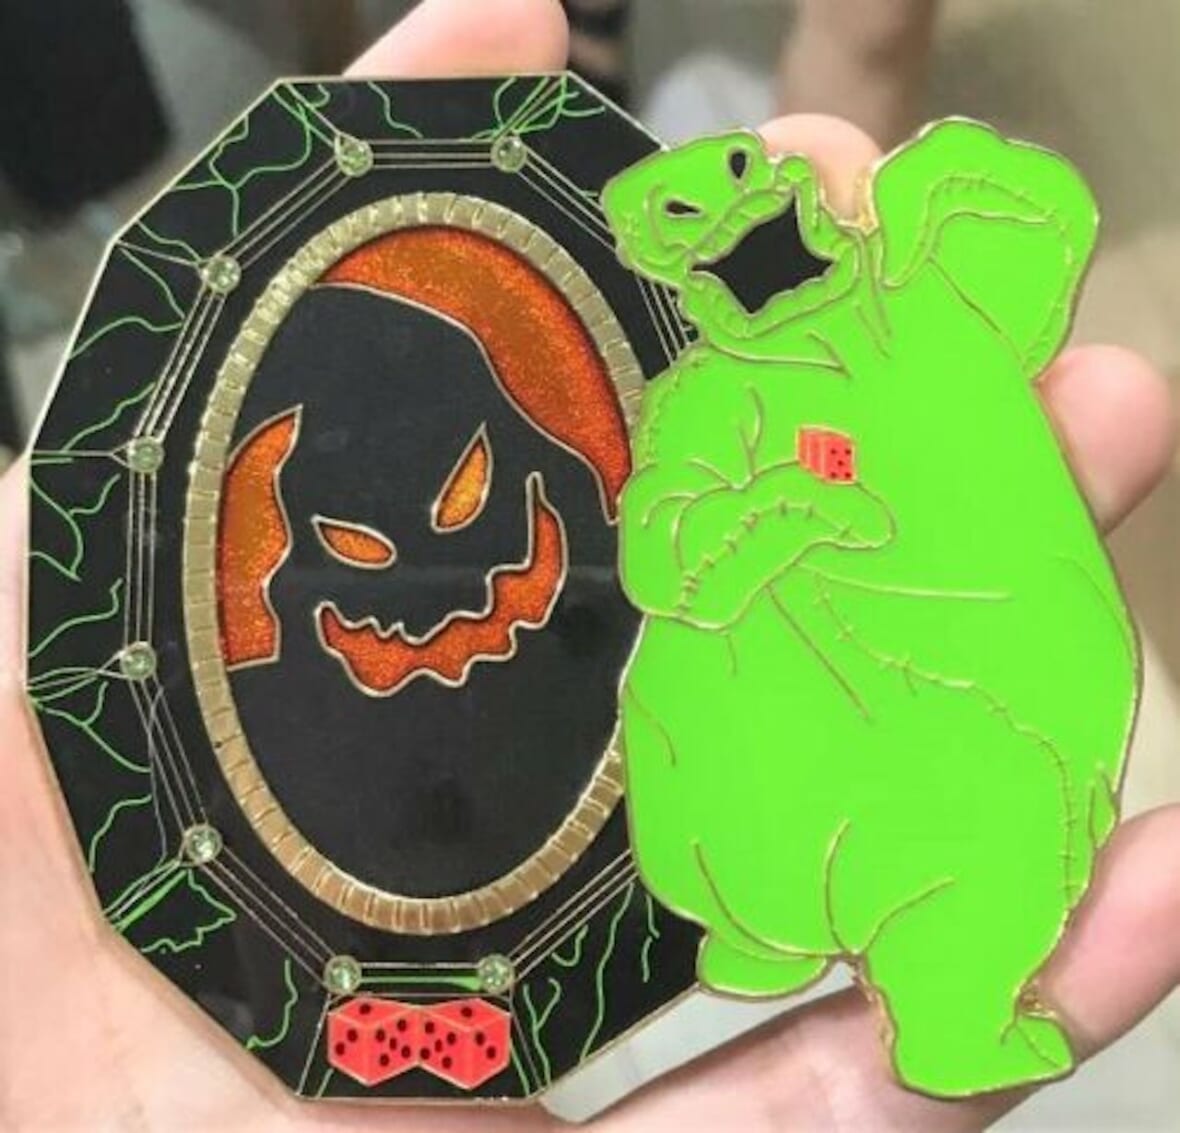 Disney's Oogie Boogie ‘Hollar’ Jekyll and Hyde Pin